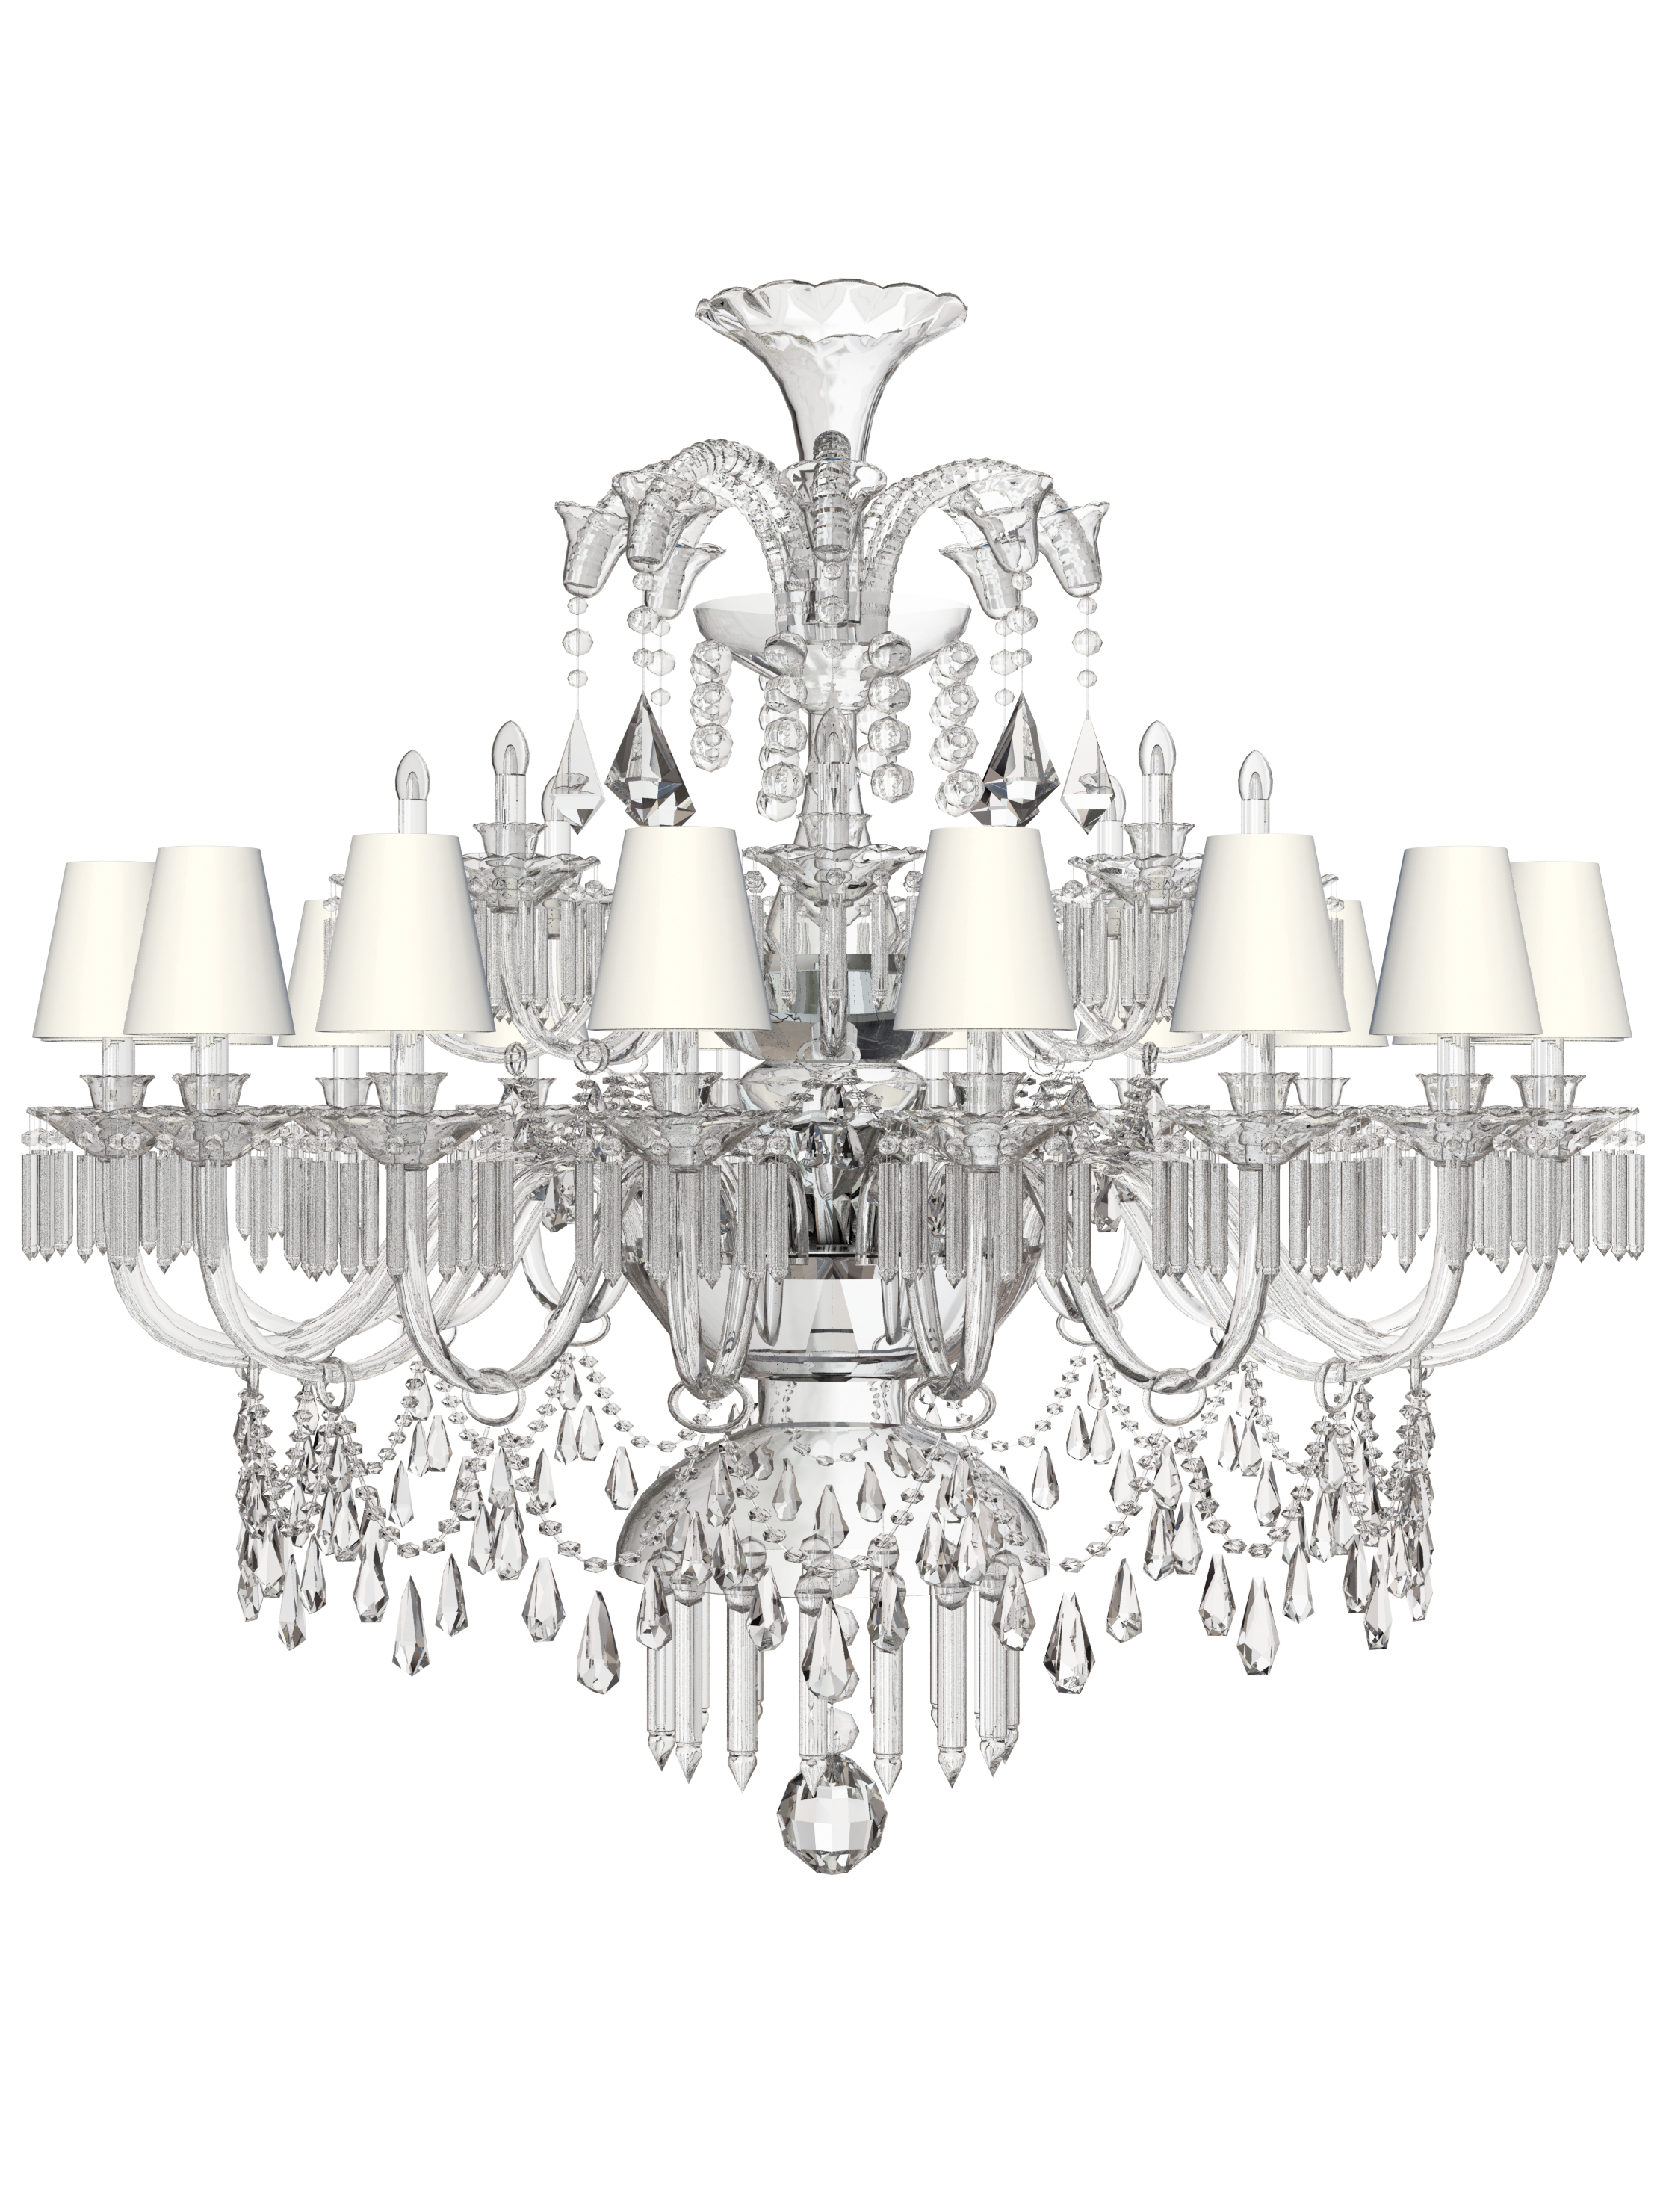 A high-quality image showcasing a stunning collection of your decorative lights in a beautiful Crystal arm chandelier, European Chandelier